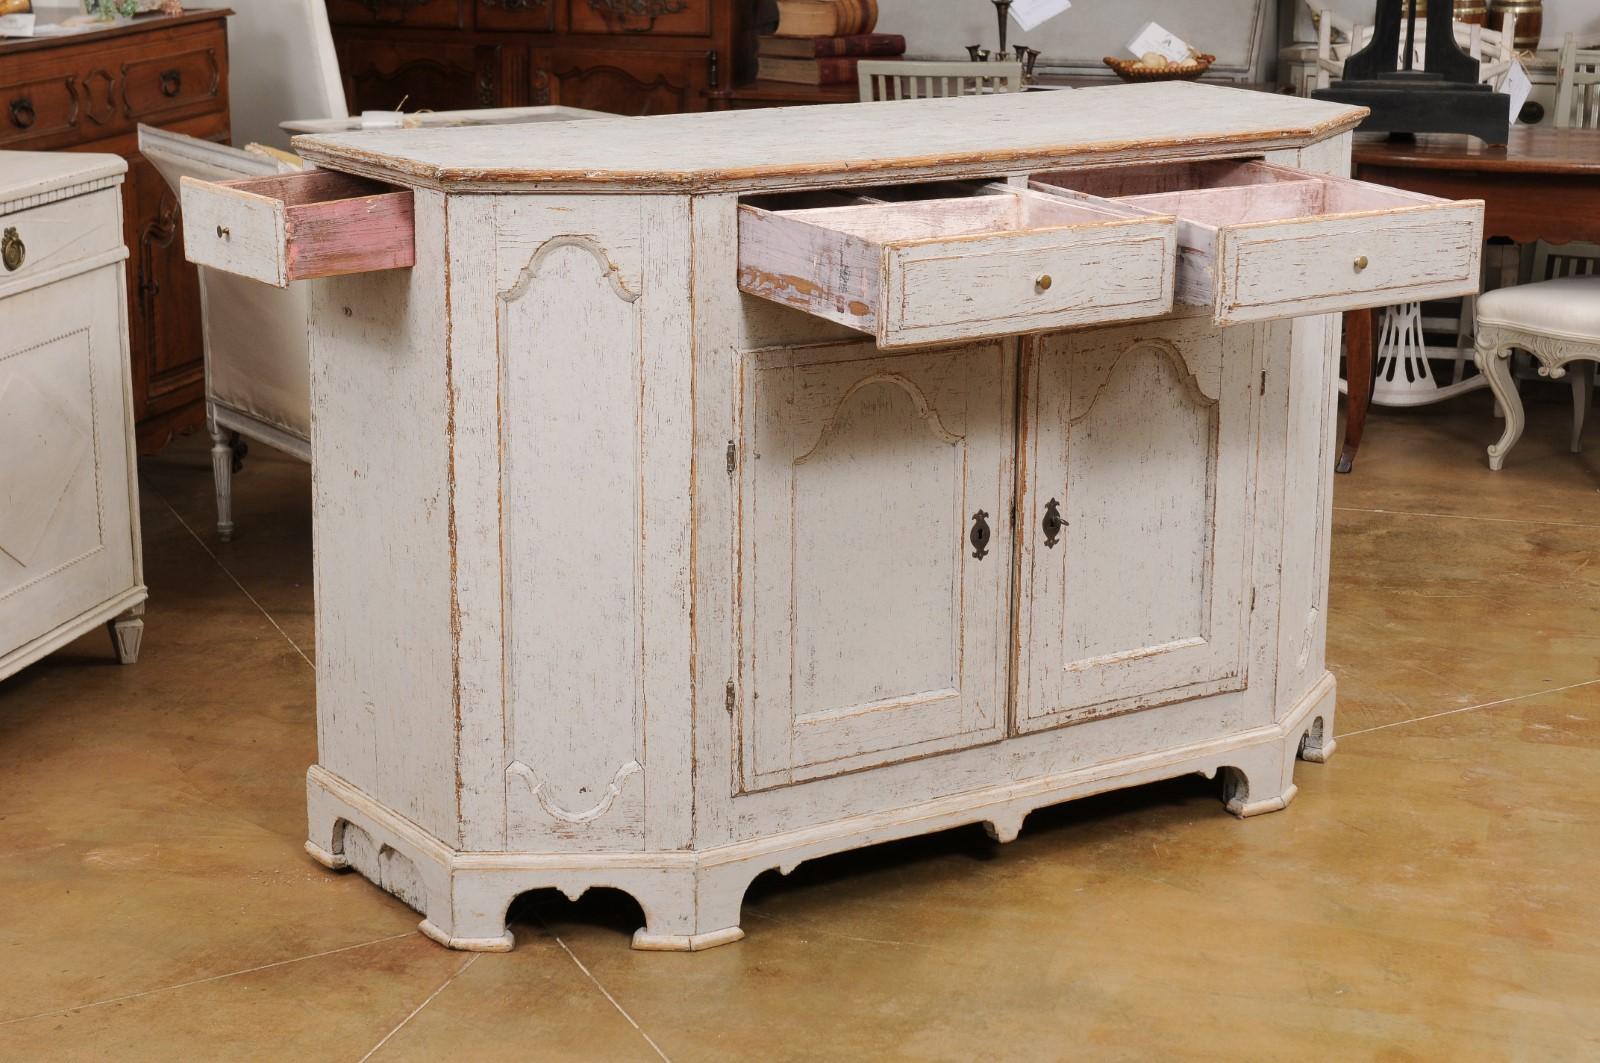 A Swedish Rococo period 18th century painted wood buffet from Värmland, with canted sides, four drawers and two doors. Created in the west-central province of Värmland during the 18th century, this painted buffet features a polygonal top sitting